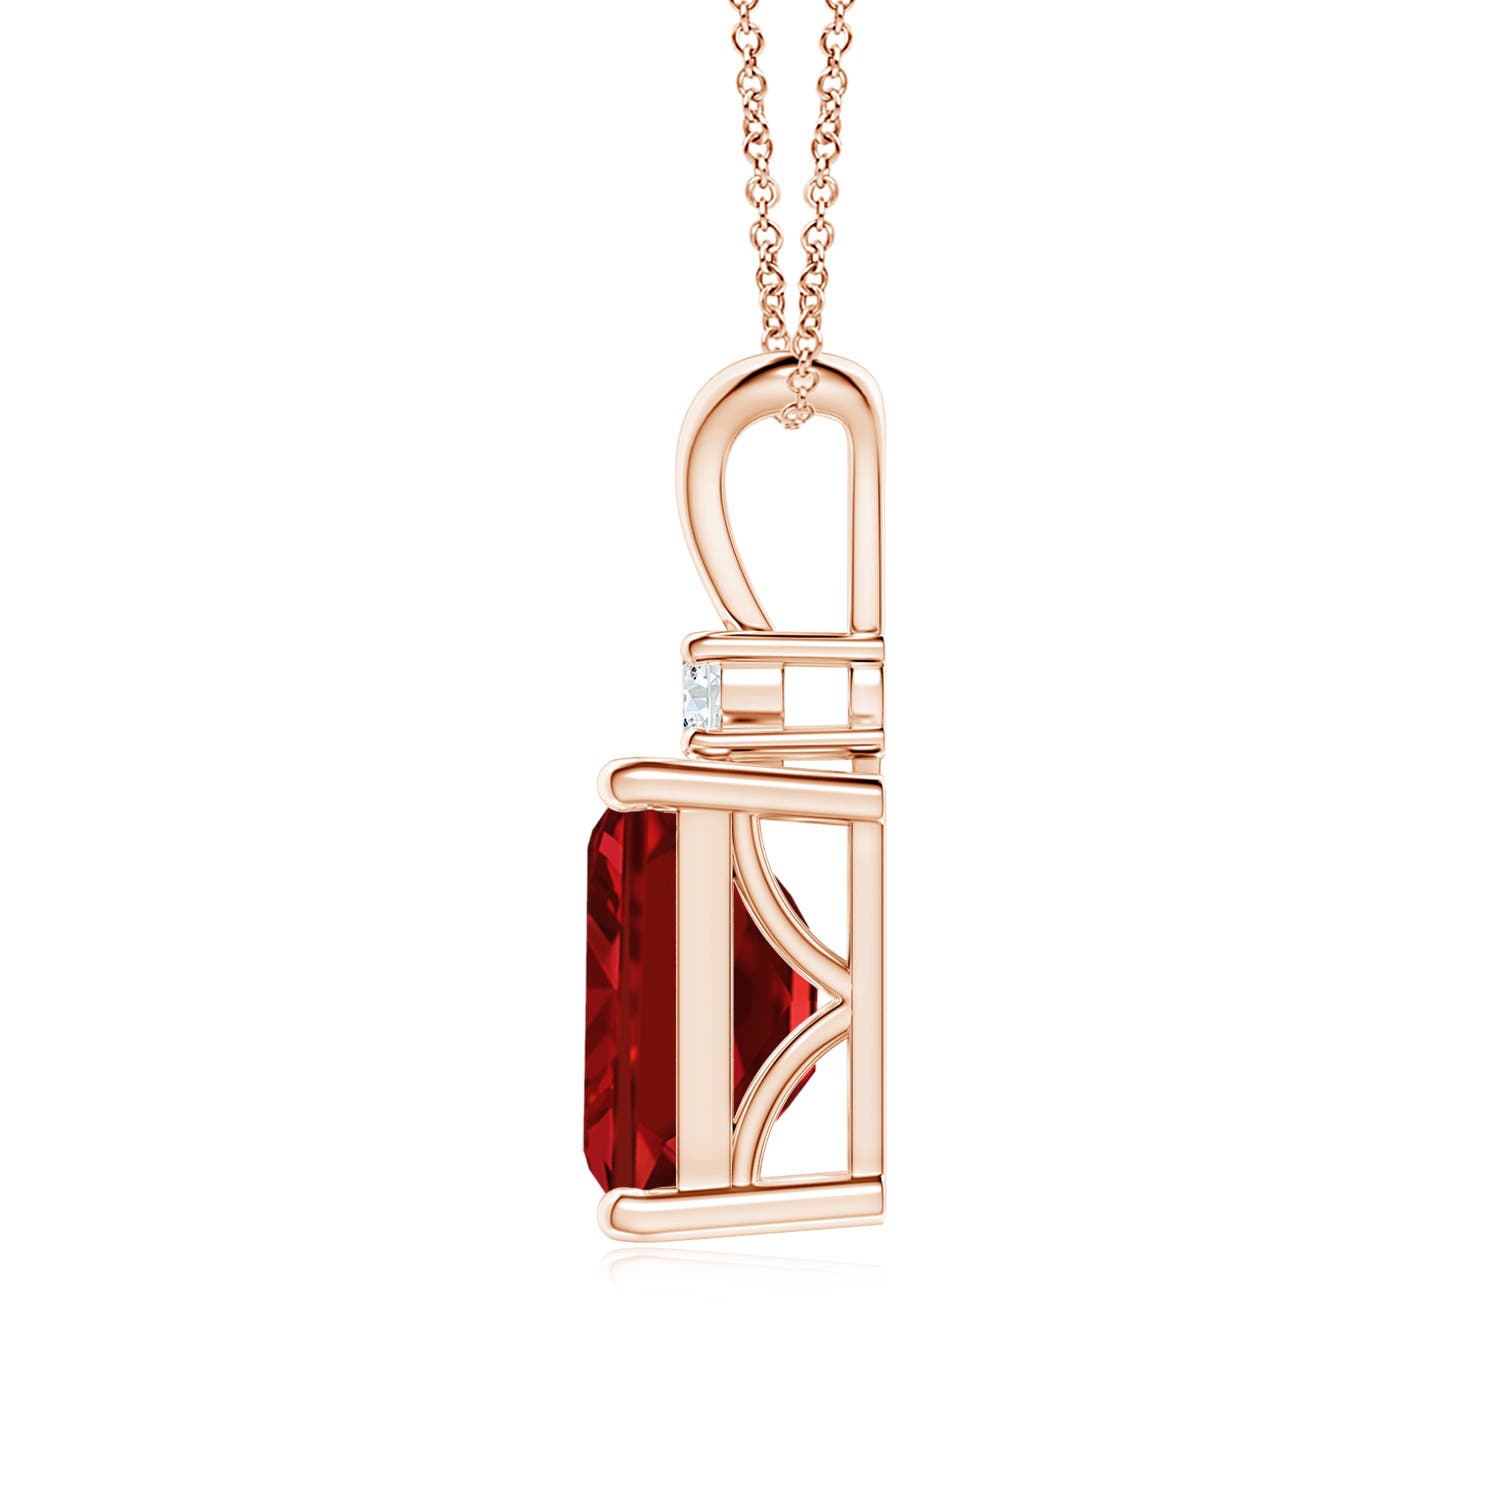 AAAA - Ruby / 3.07 CT / 14 KT Rose Gold